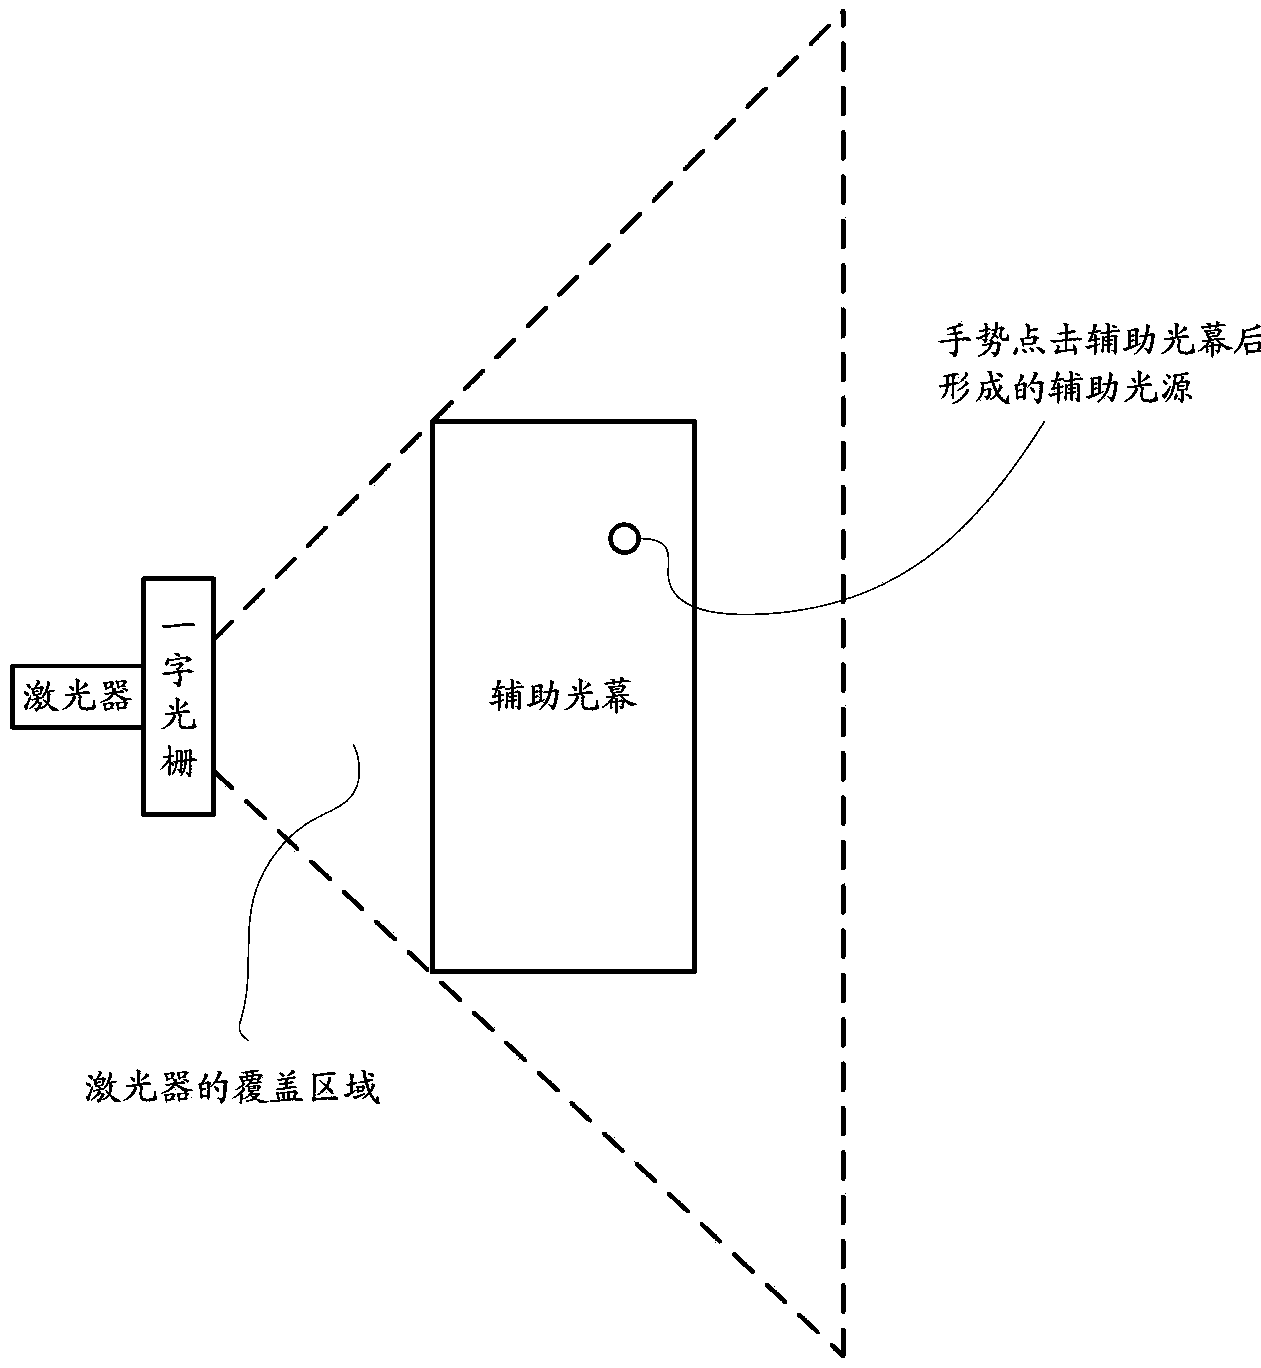 Human-computer interaction method and associated equipment and system